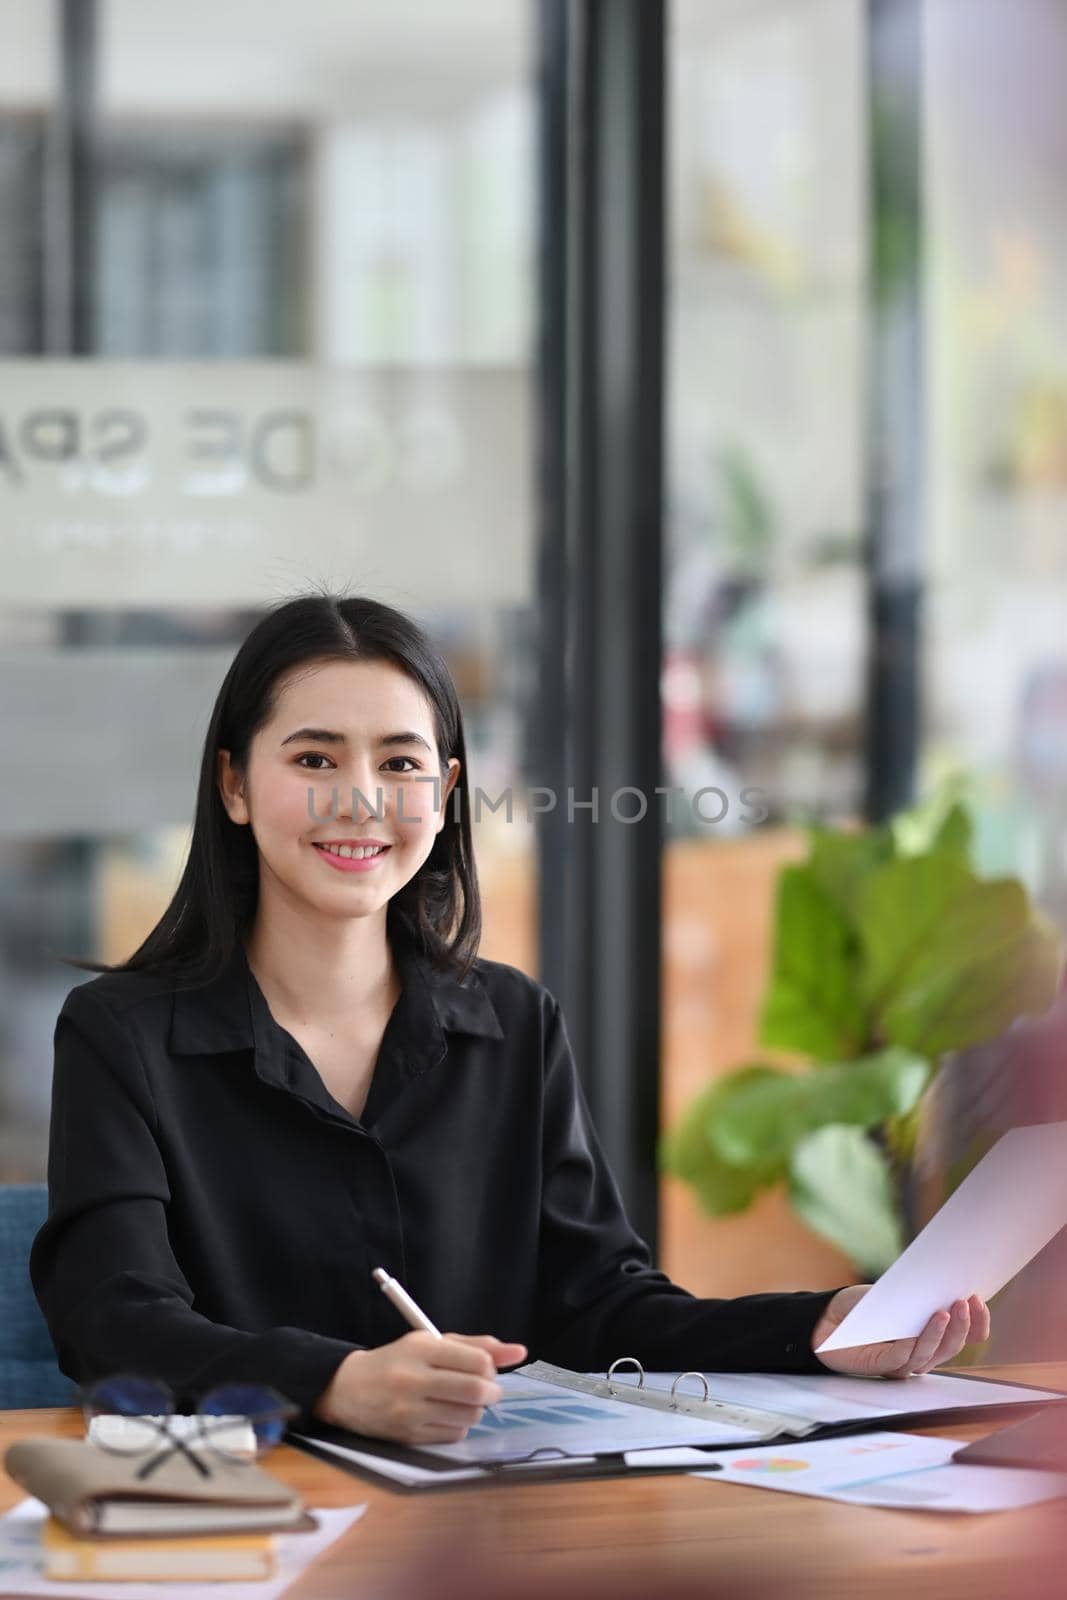 Portrait of attractive businesswoman sitting at her office desk and smiling to camera.